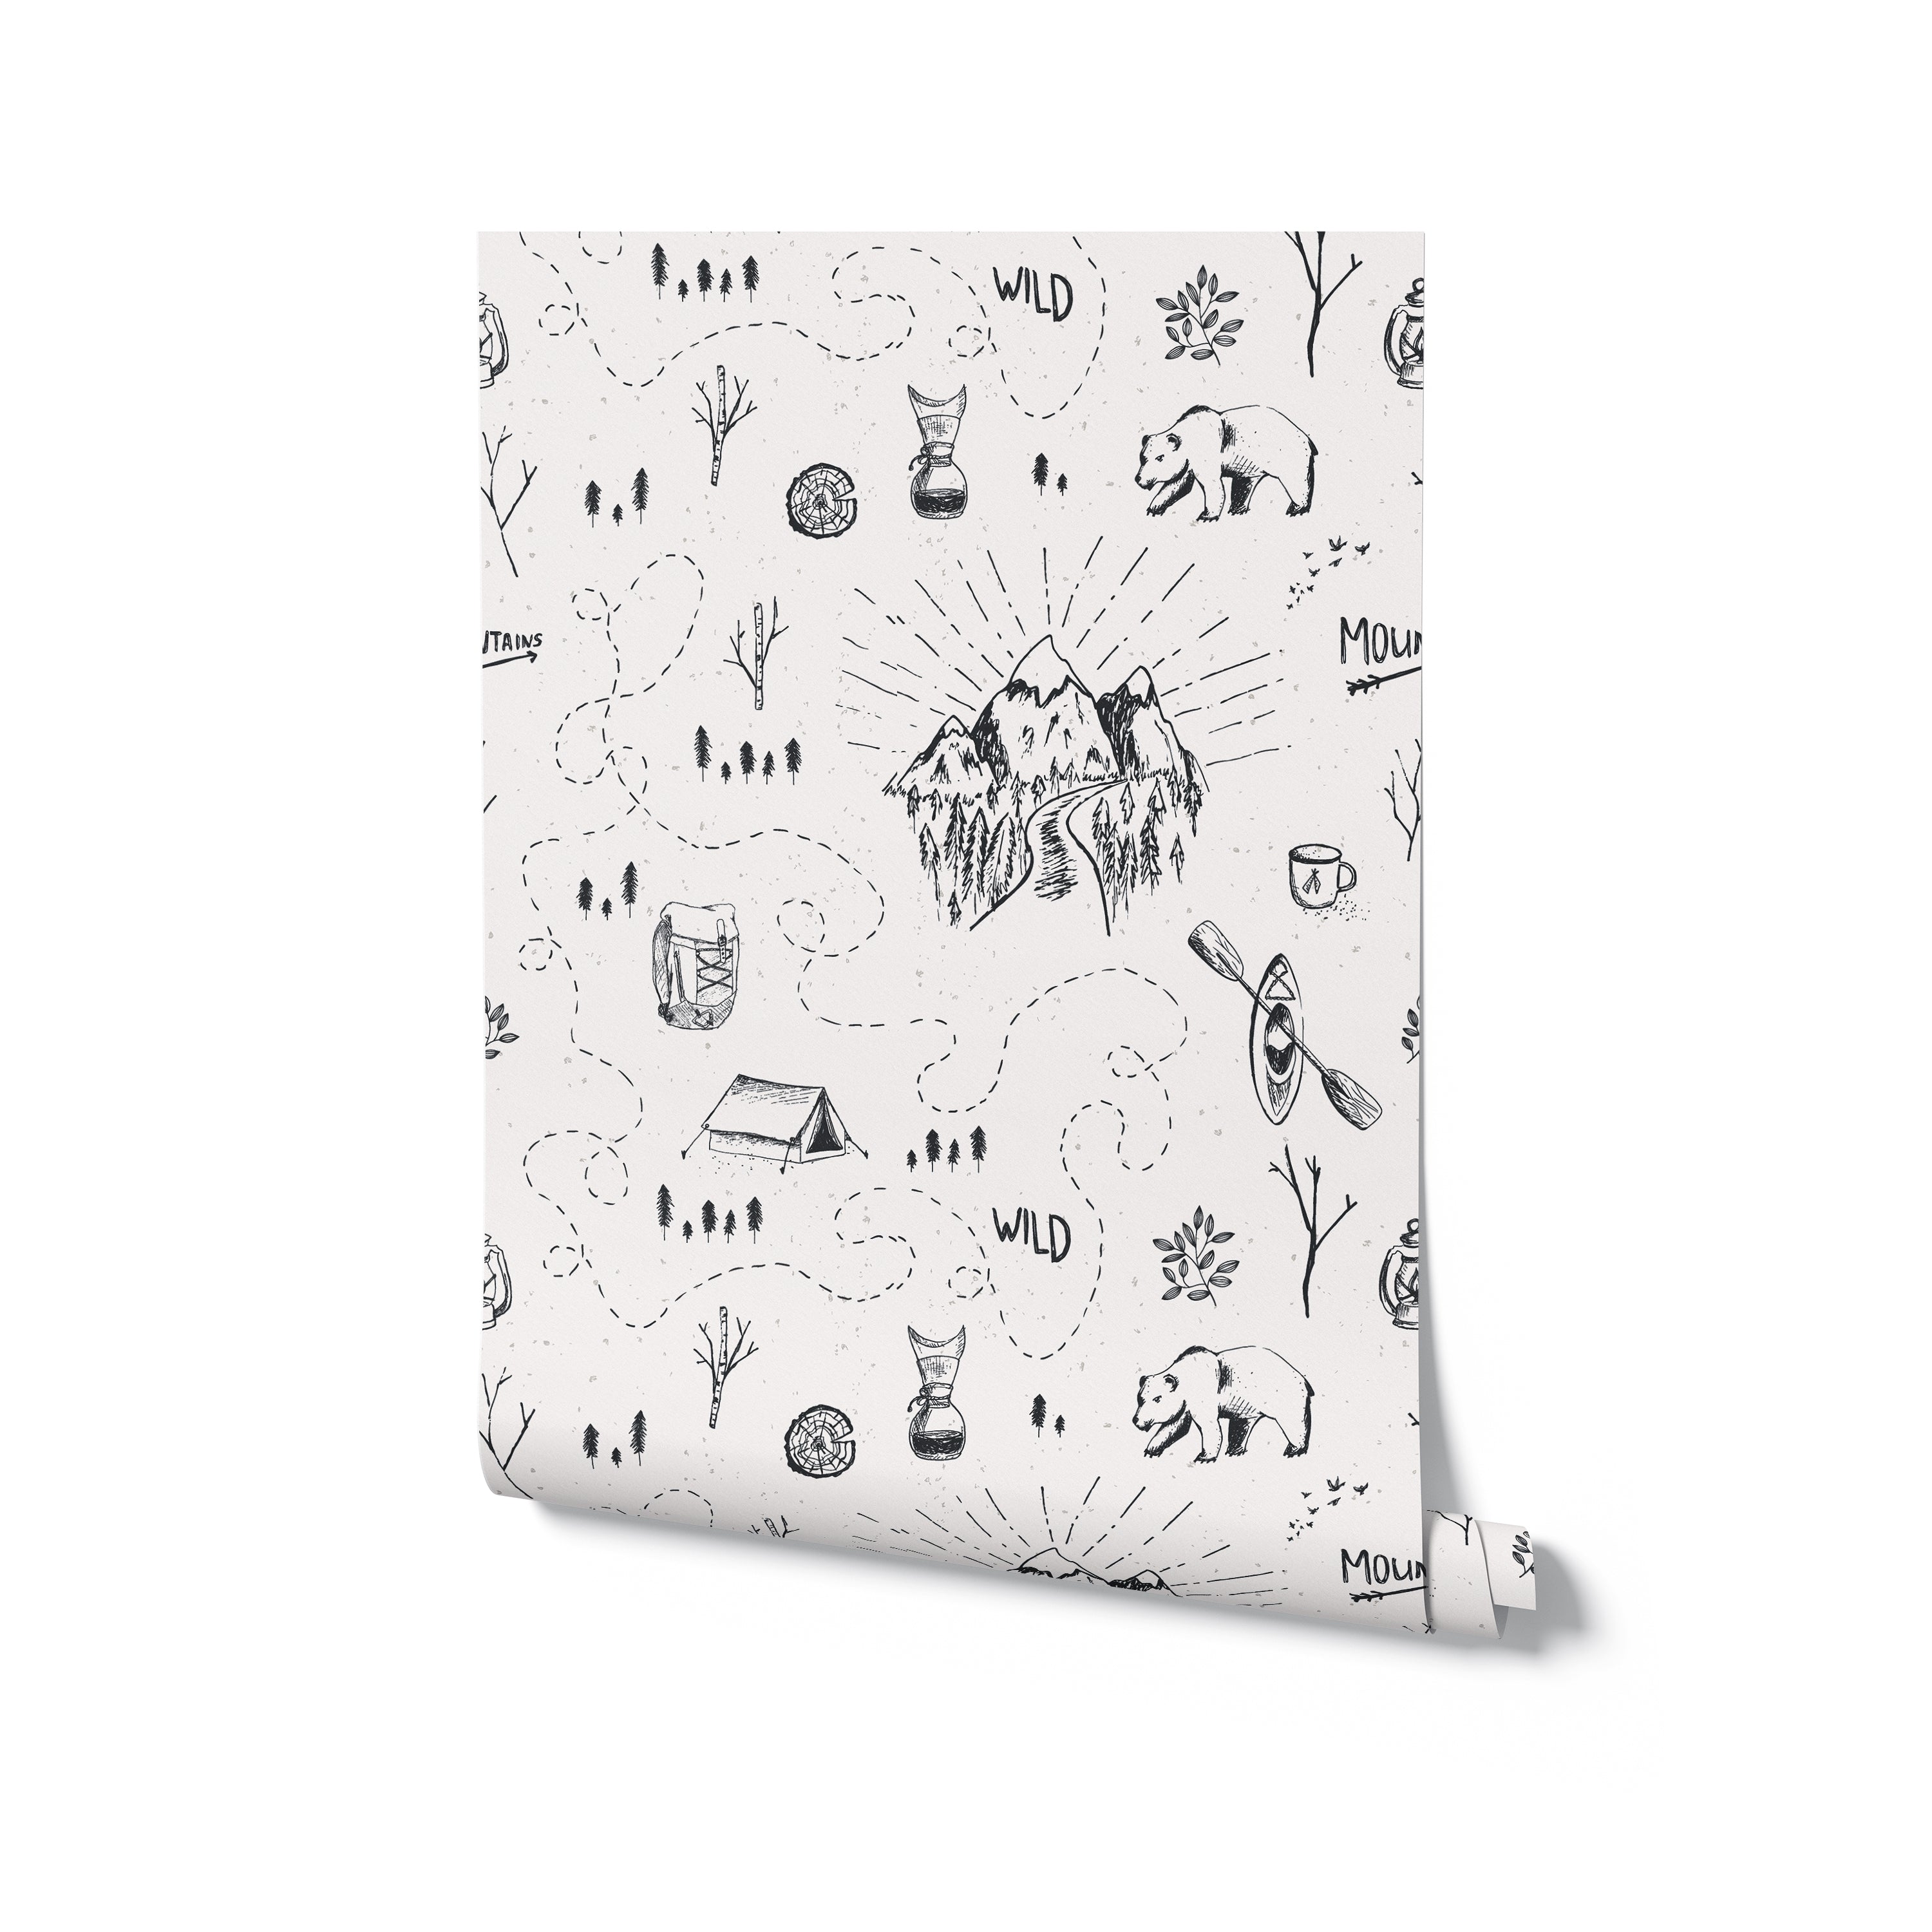 A roll of Big Adventure Kids Wallpaper presents a pattern of illustrated outdoor and wildlife scenes with bears, tents, and nature, in black sketch style on white, ready to inspire stories and dreams in any child's room.